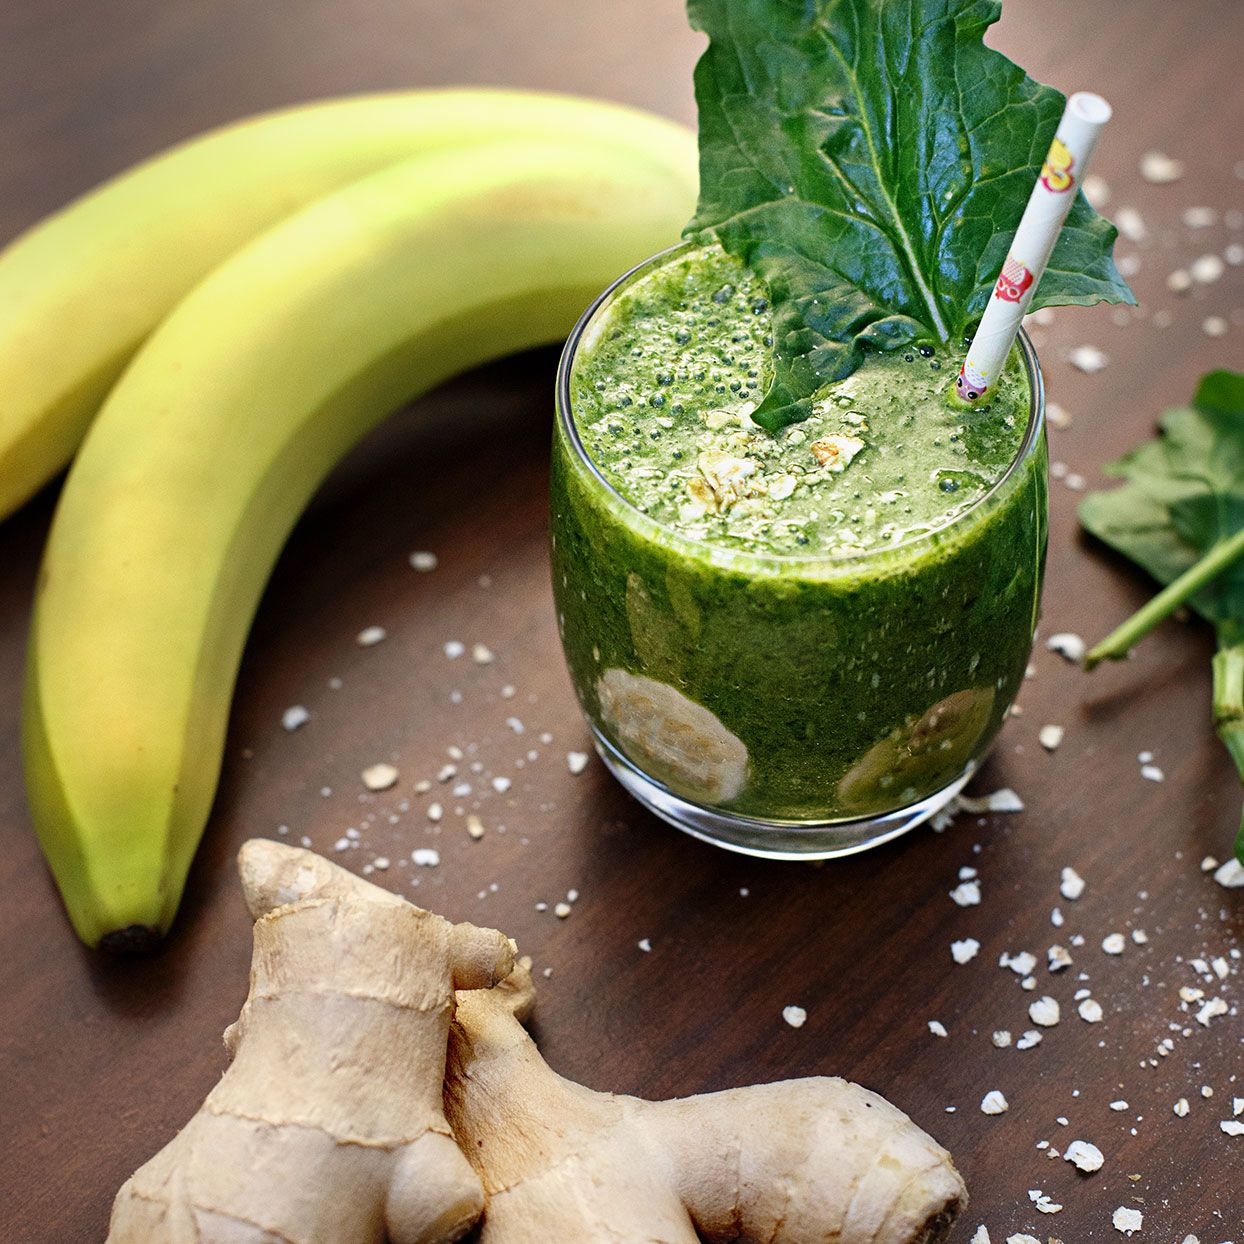 Healthy Green Smoothie Recipes That Taste Amazing (and Save You ...